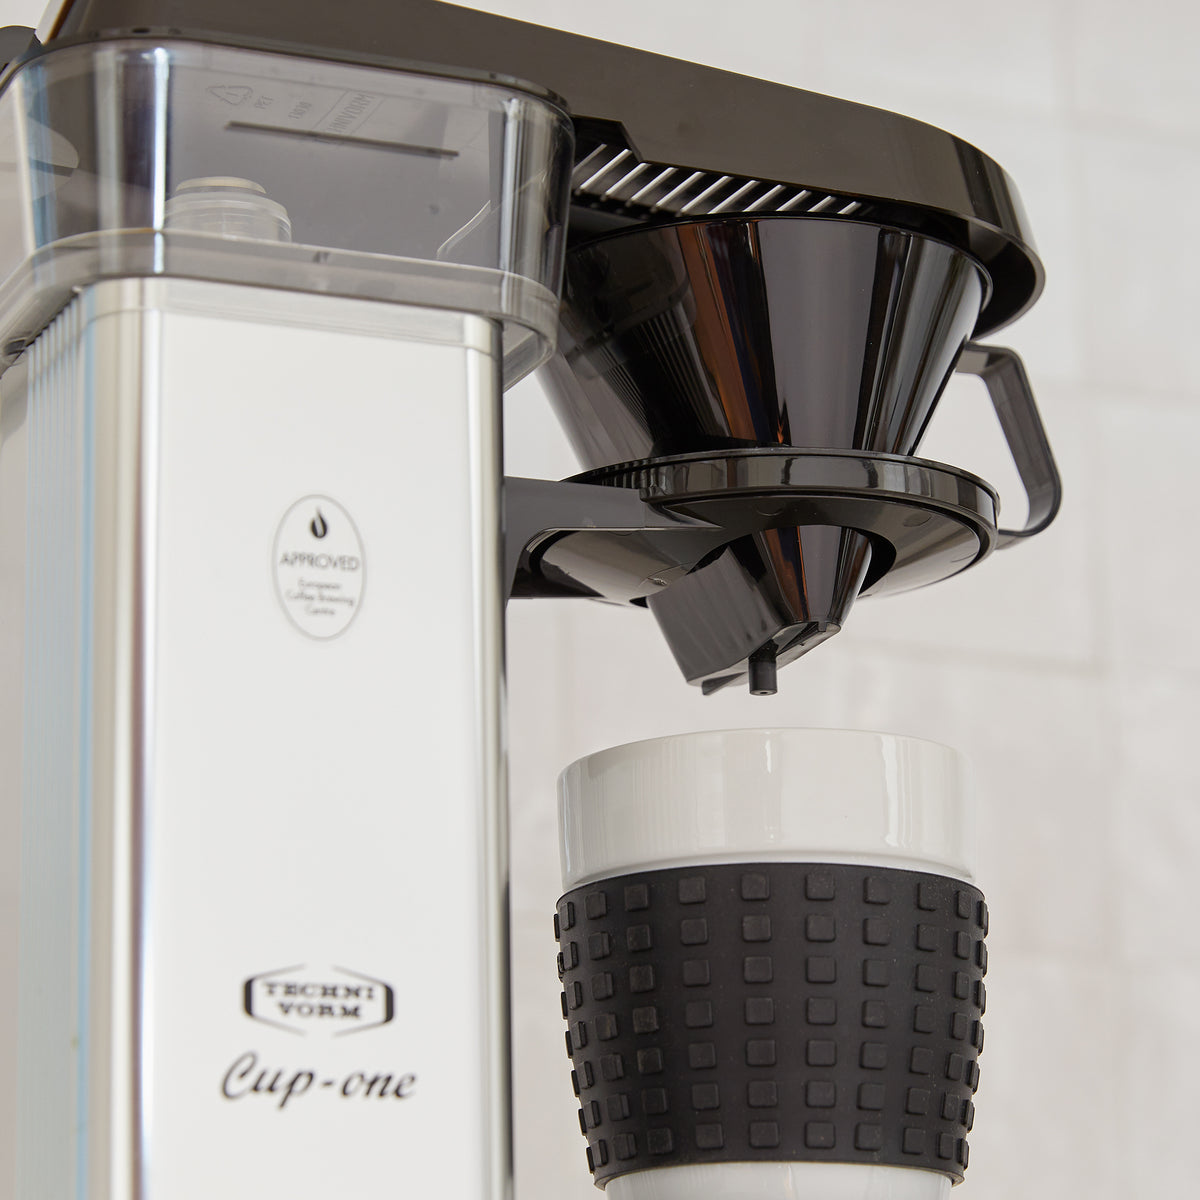 A close-up of the cup-one, focused on the drip brew basket and vented cover for the brew basket and water reservoir. The 'Approved by European Coffee Brewing Centre' sticker is visble, and the Technivorm Cup-one badging.